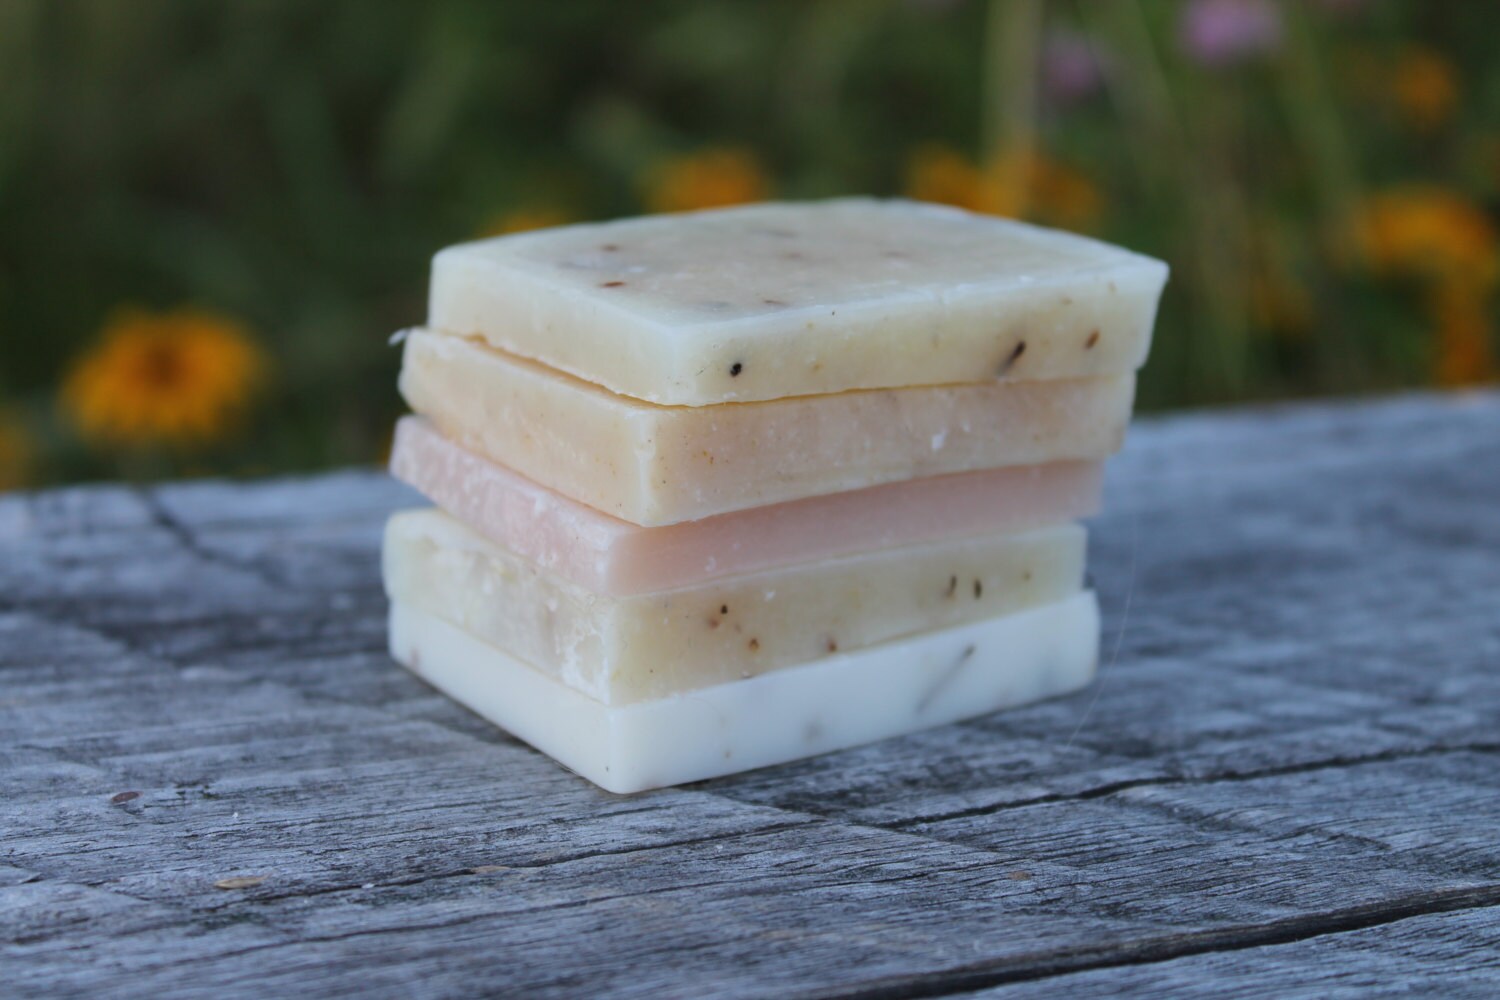 Vermont Made Artisan Soap Sampler All Natural Handcrafted Soap-Belle Savon Vermont